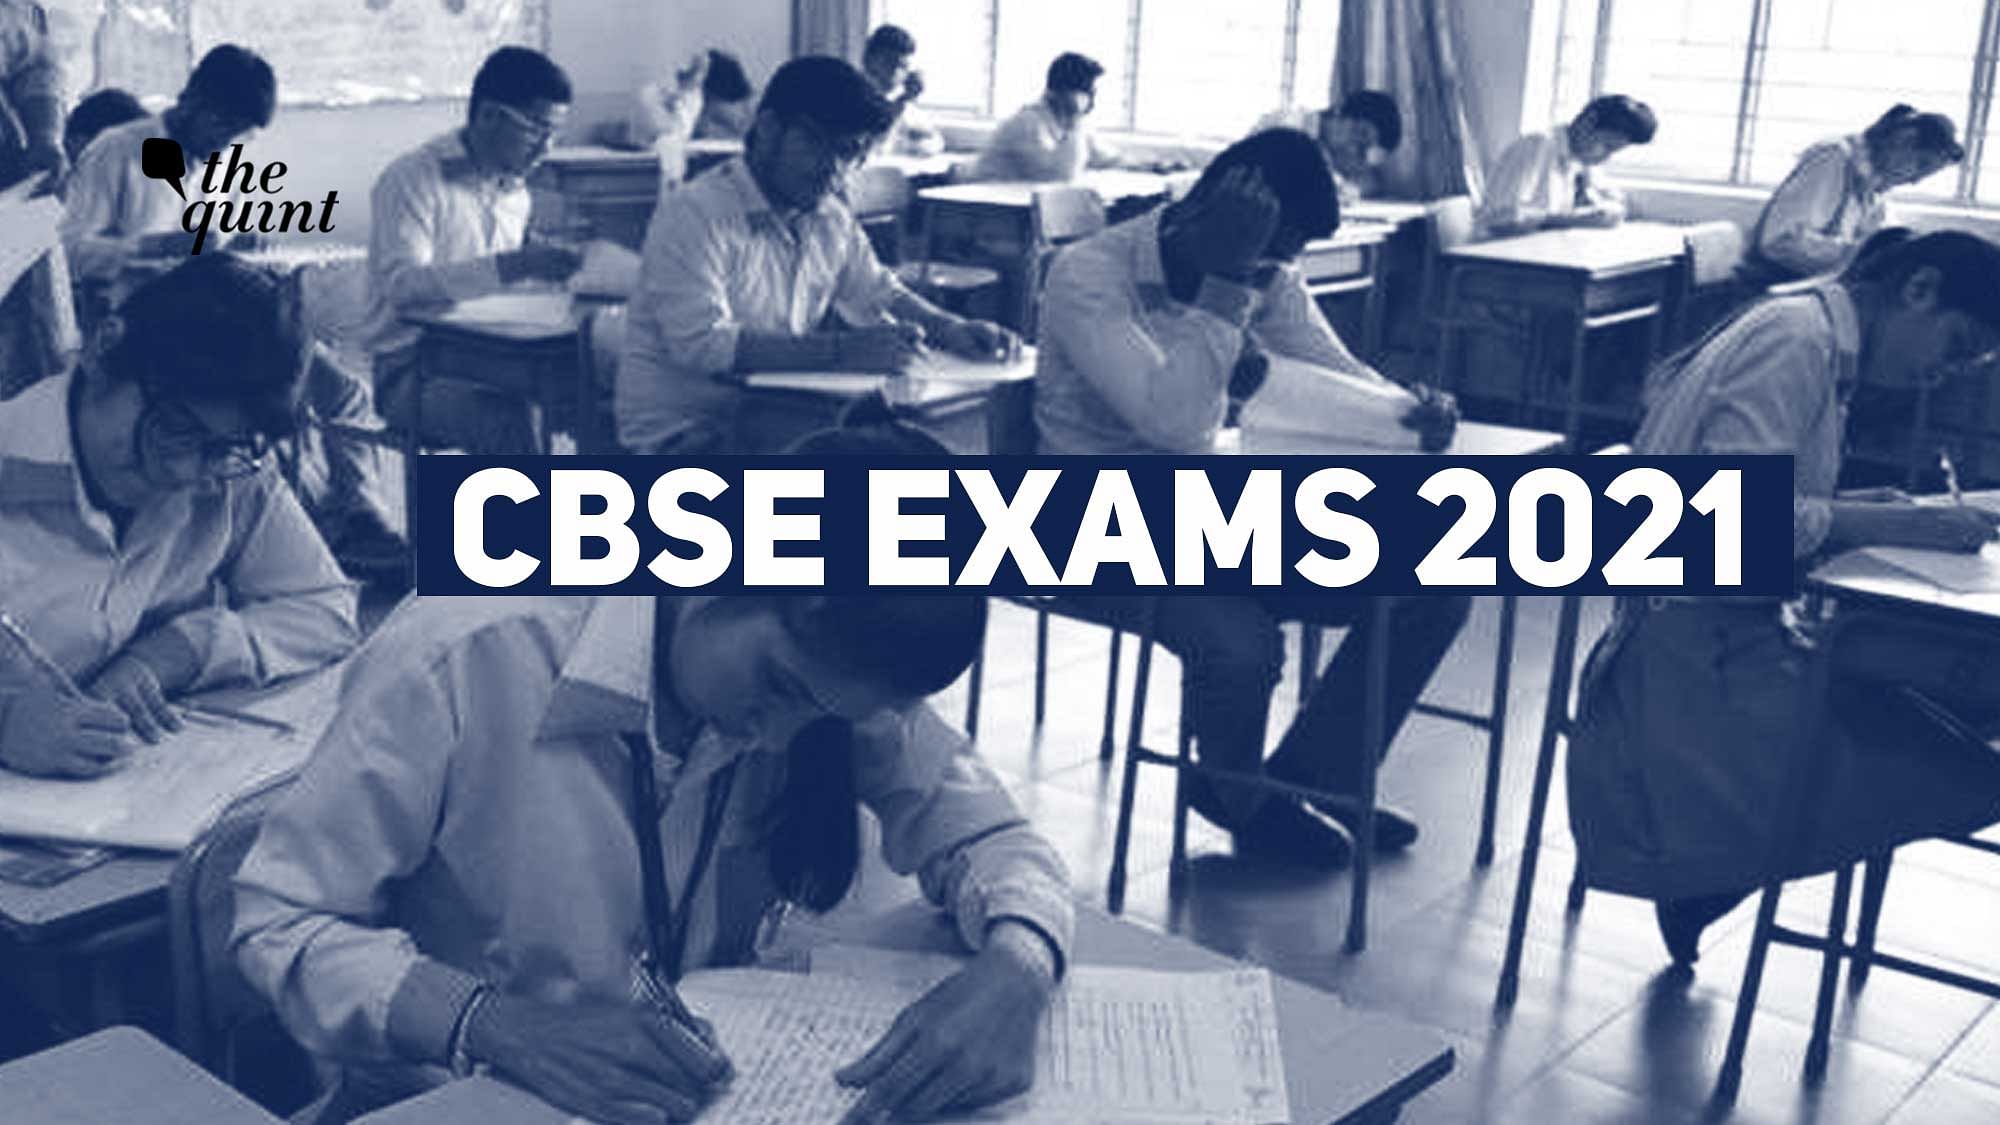 The Class 12 CBSE examinations have been cancelled, the government said on Tuesday, 1 June.